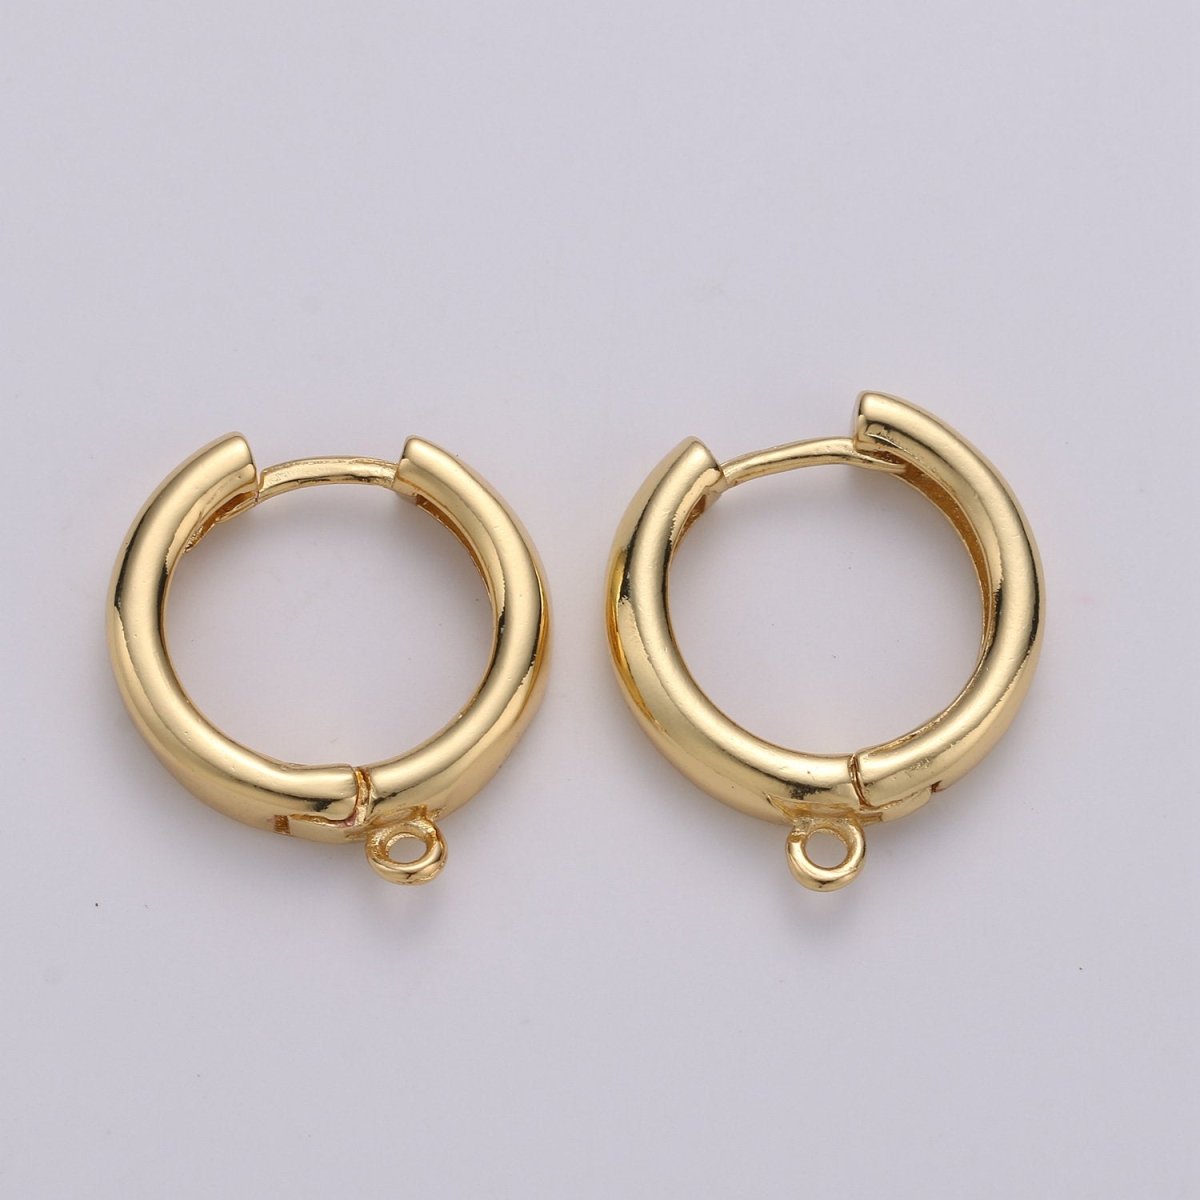 Overstock 24K Gold Filled one touch w/ open link Lever back earring making, 20x18 mm, Nickel free Lead Free for Earring Charm Making Findings K-903 - DLUXCA